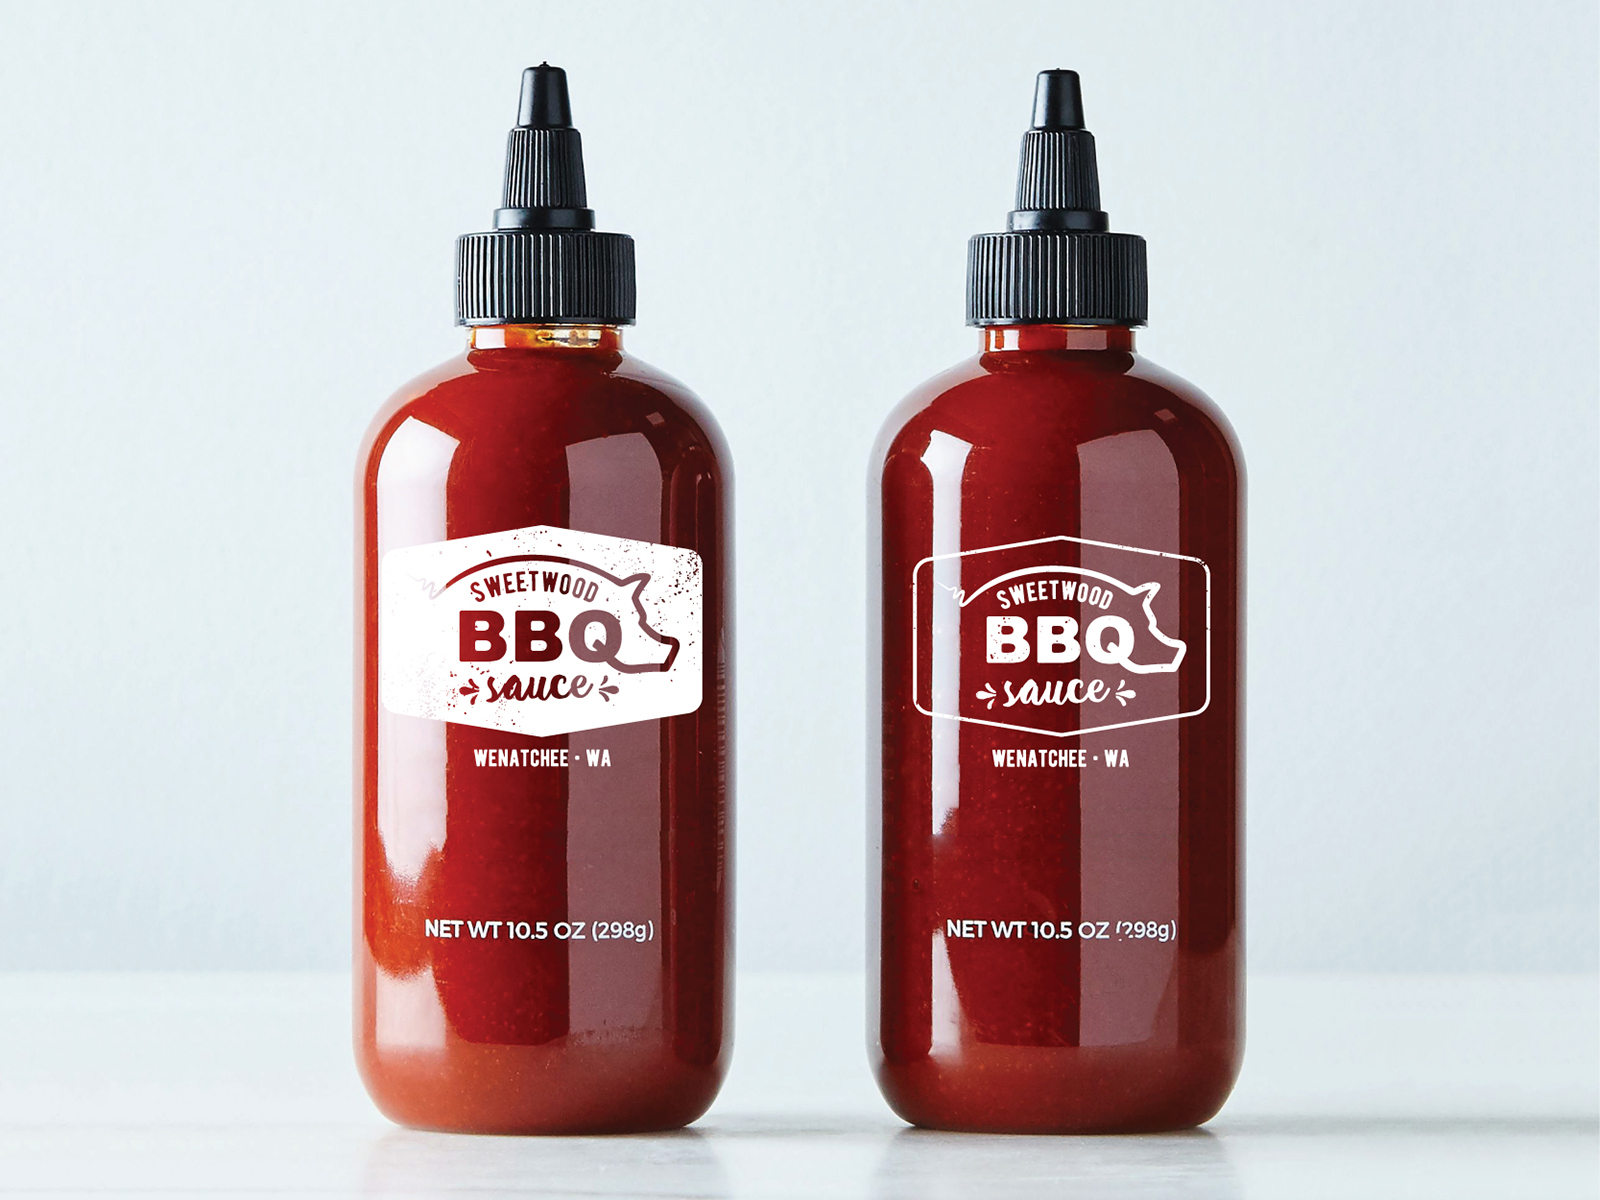 Sweetwood Bbq Sauce Labels By Nick Winters On Dribbble,Cat Colors Blue